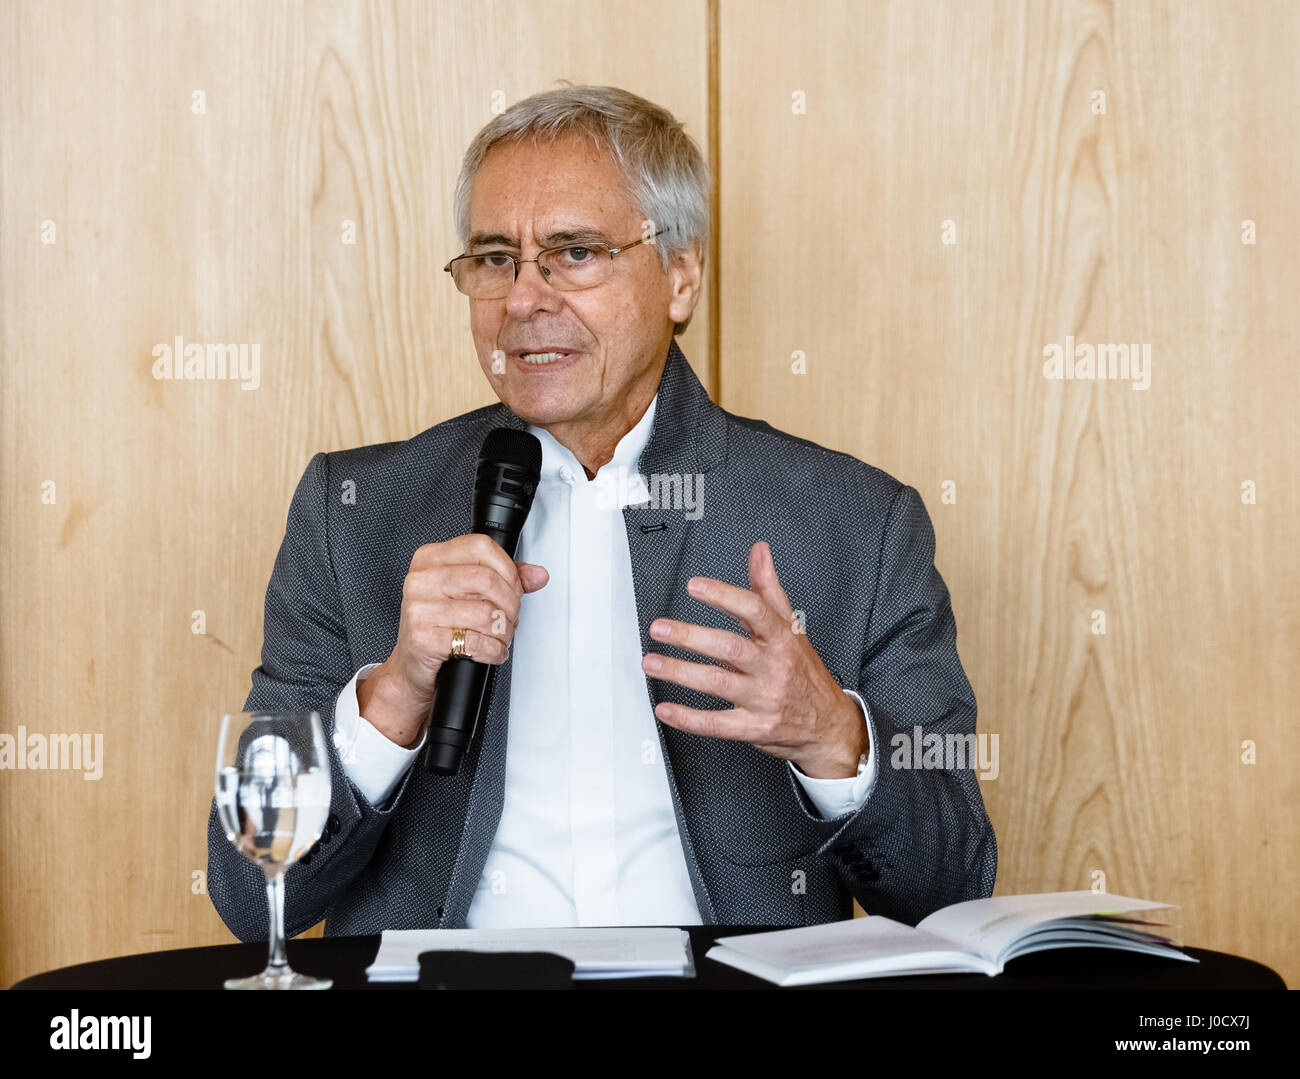 Hamburg, Germany. 11th Apr, 2017. John Neumeier, ballet director and head of choreography at the Hamburg State Ballet, talks about his projects in the opera's 2017/18 season. Photo: Markus Scholz/dpa/Alamy Live News Stock Photo